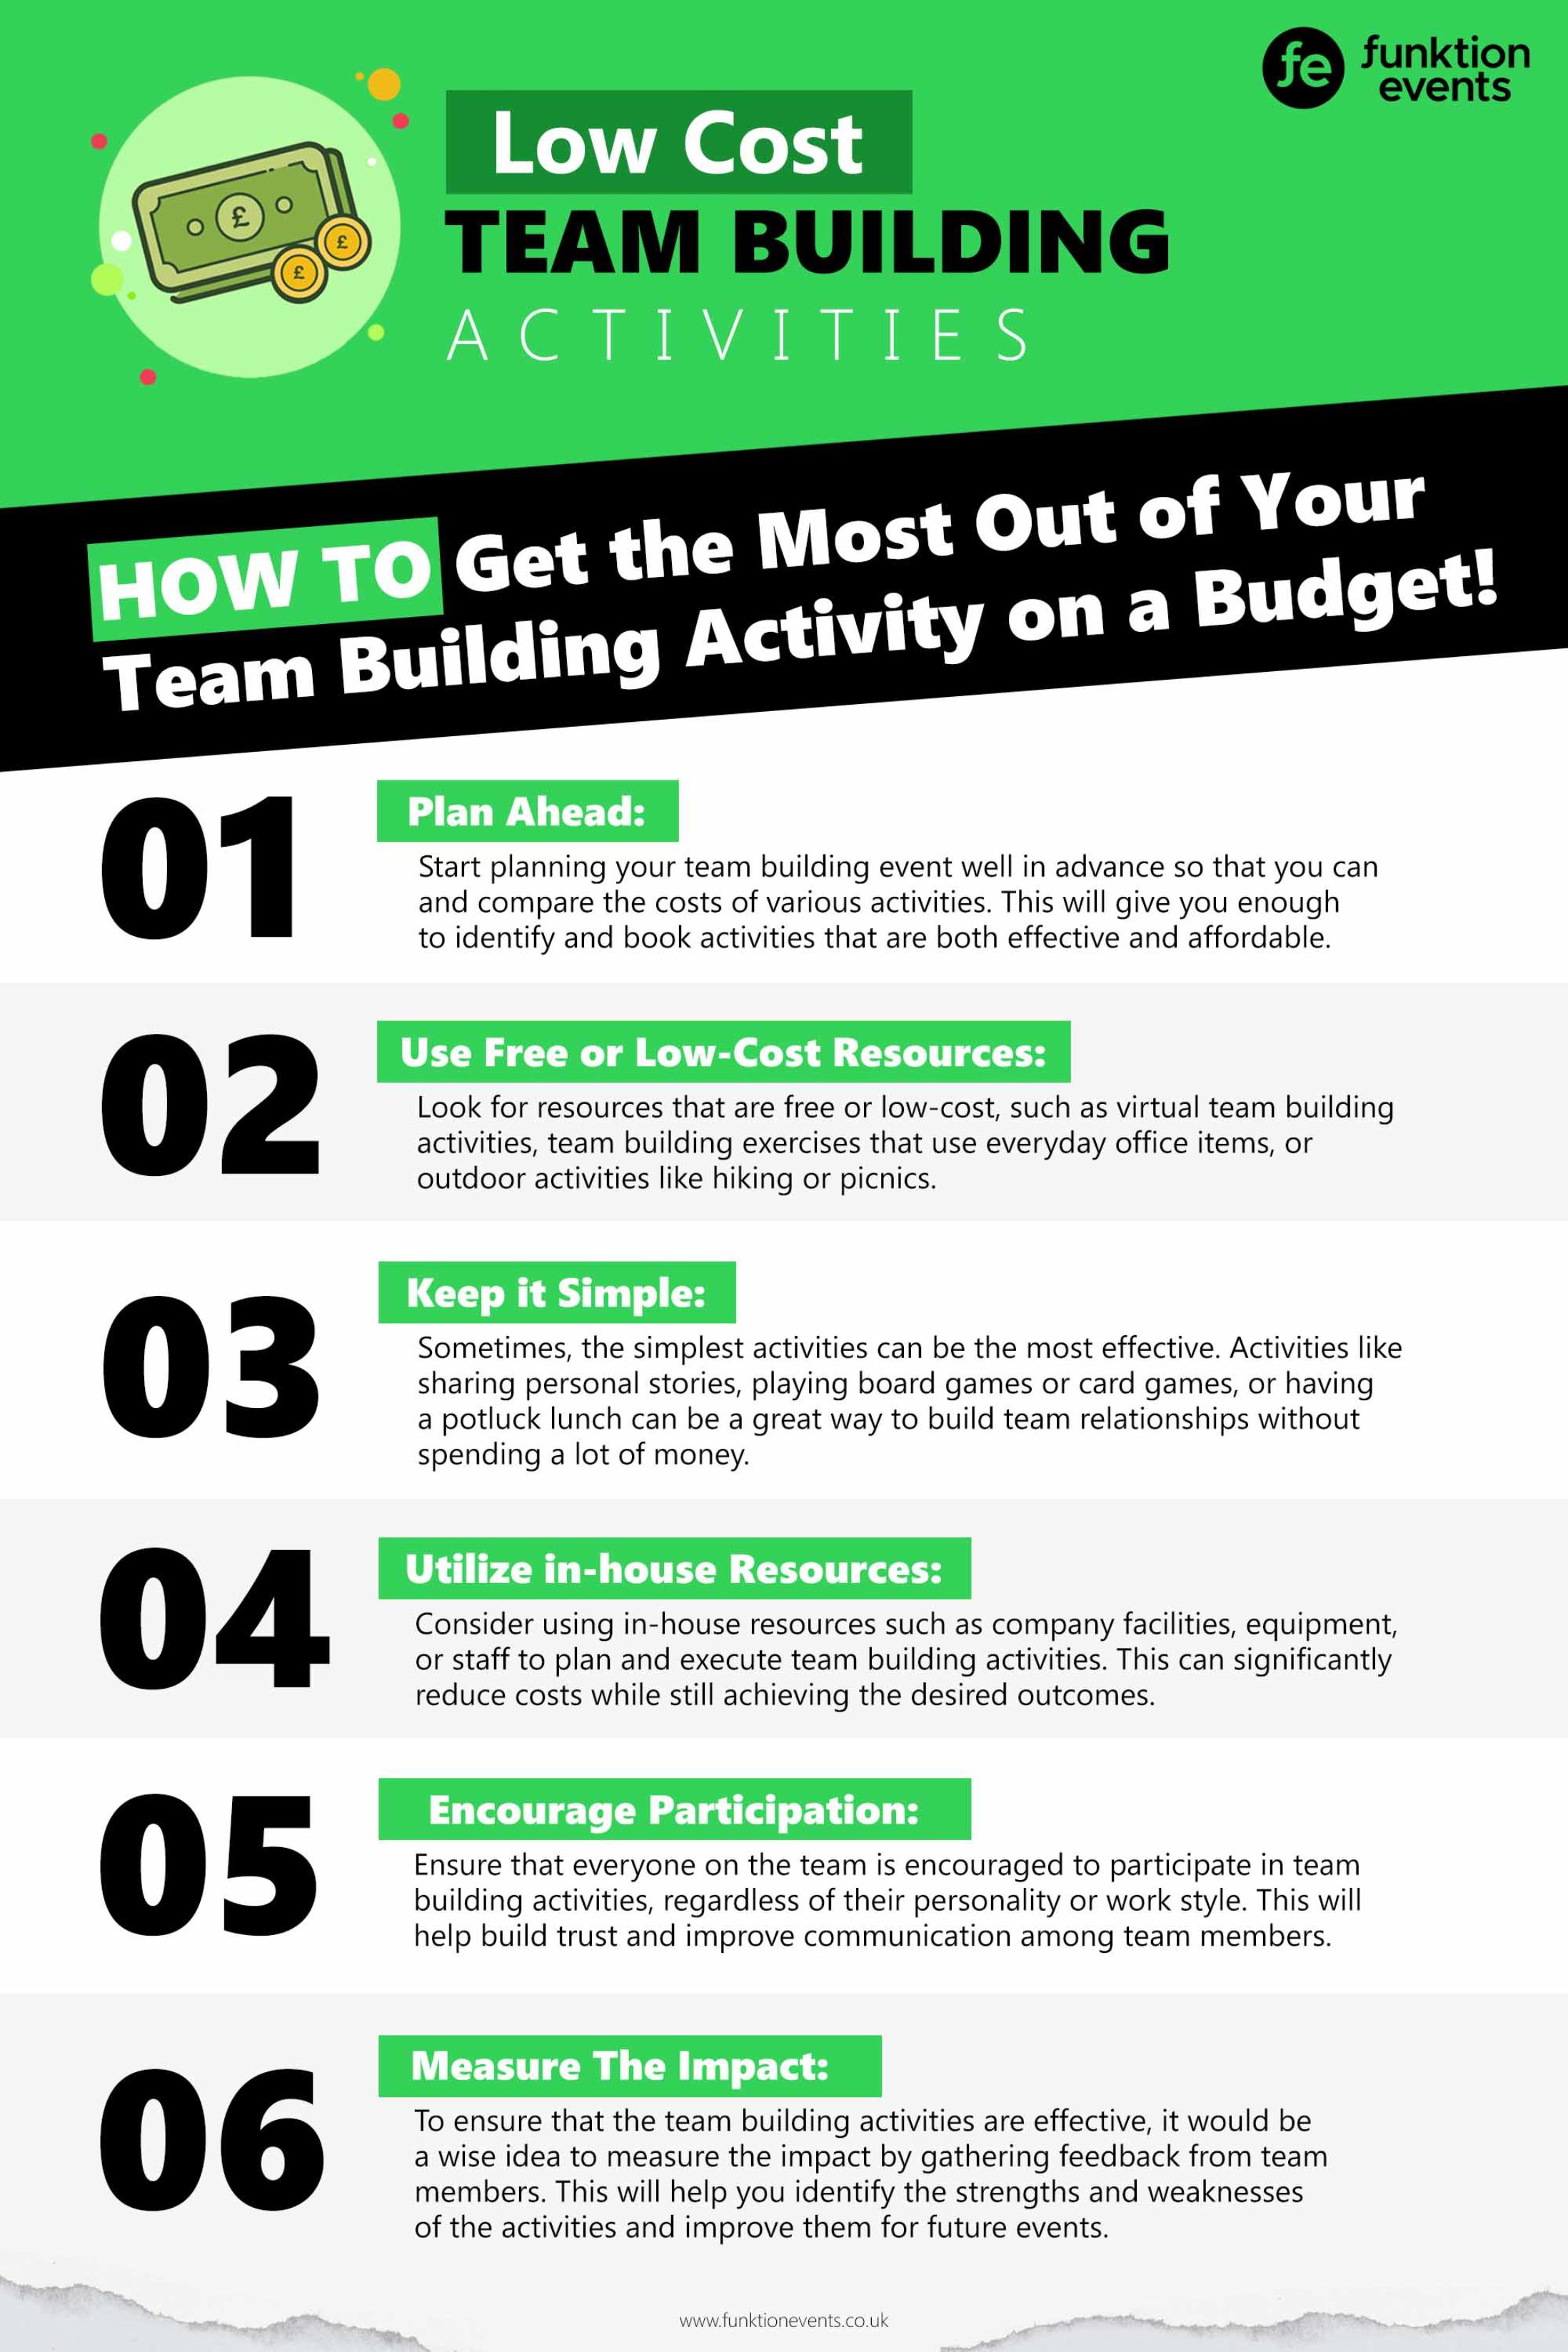 How to Get the Most Out of Your Team Building Activity on a Budget